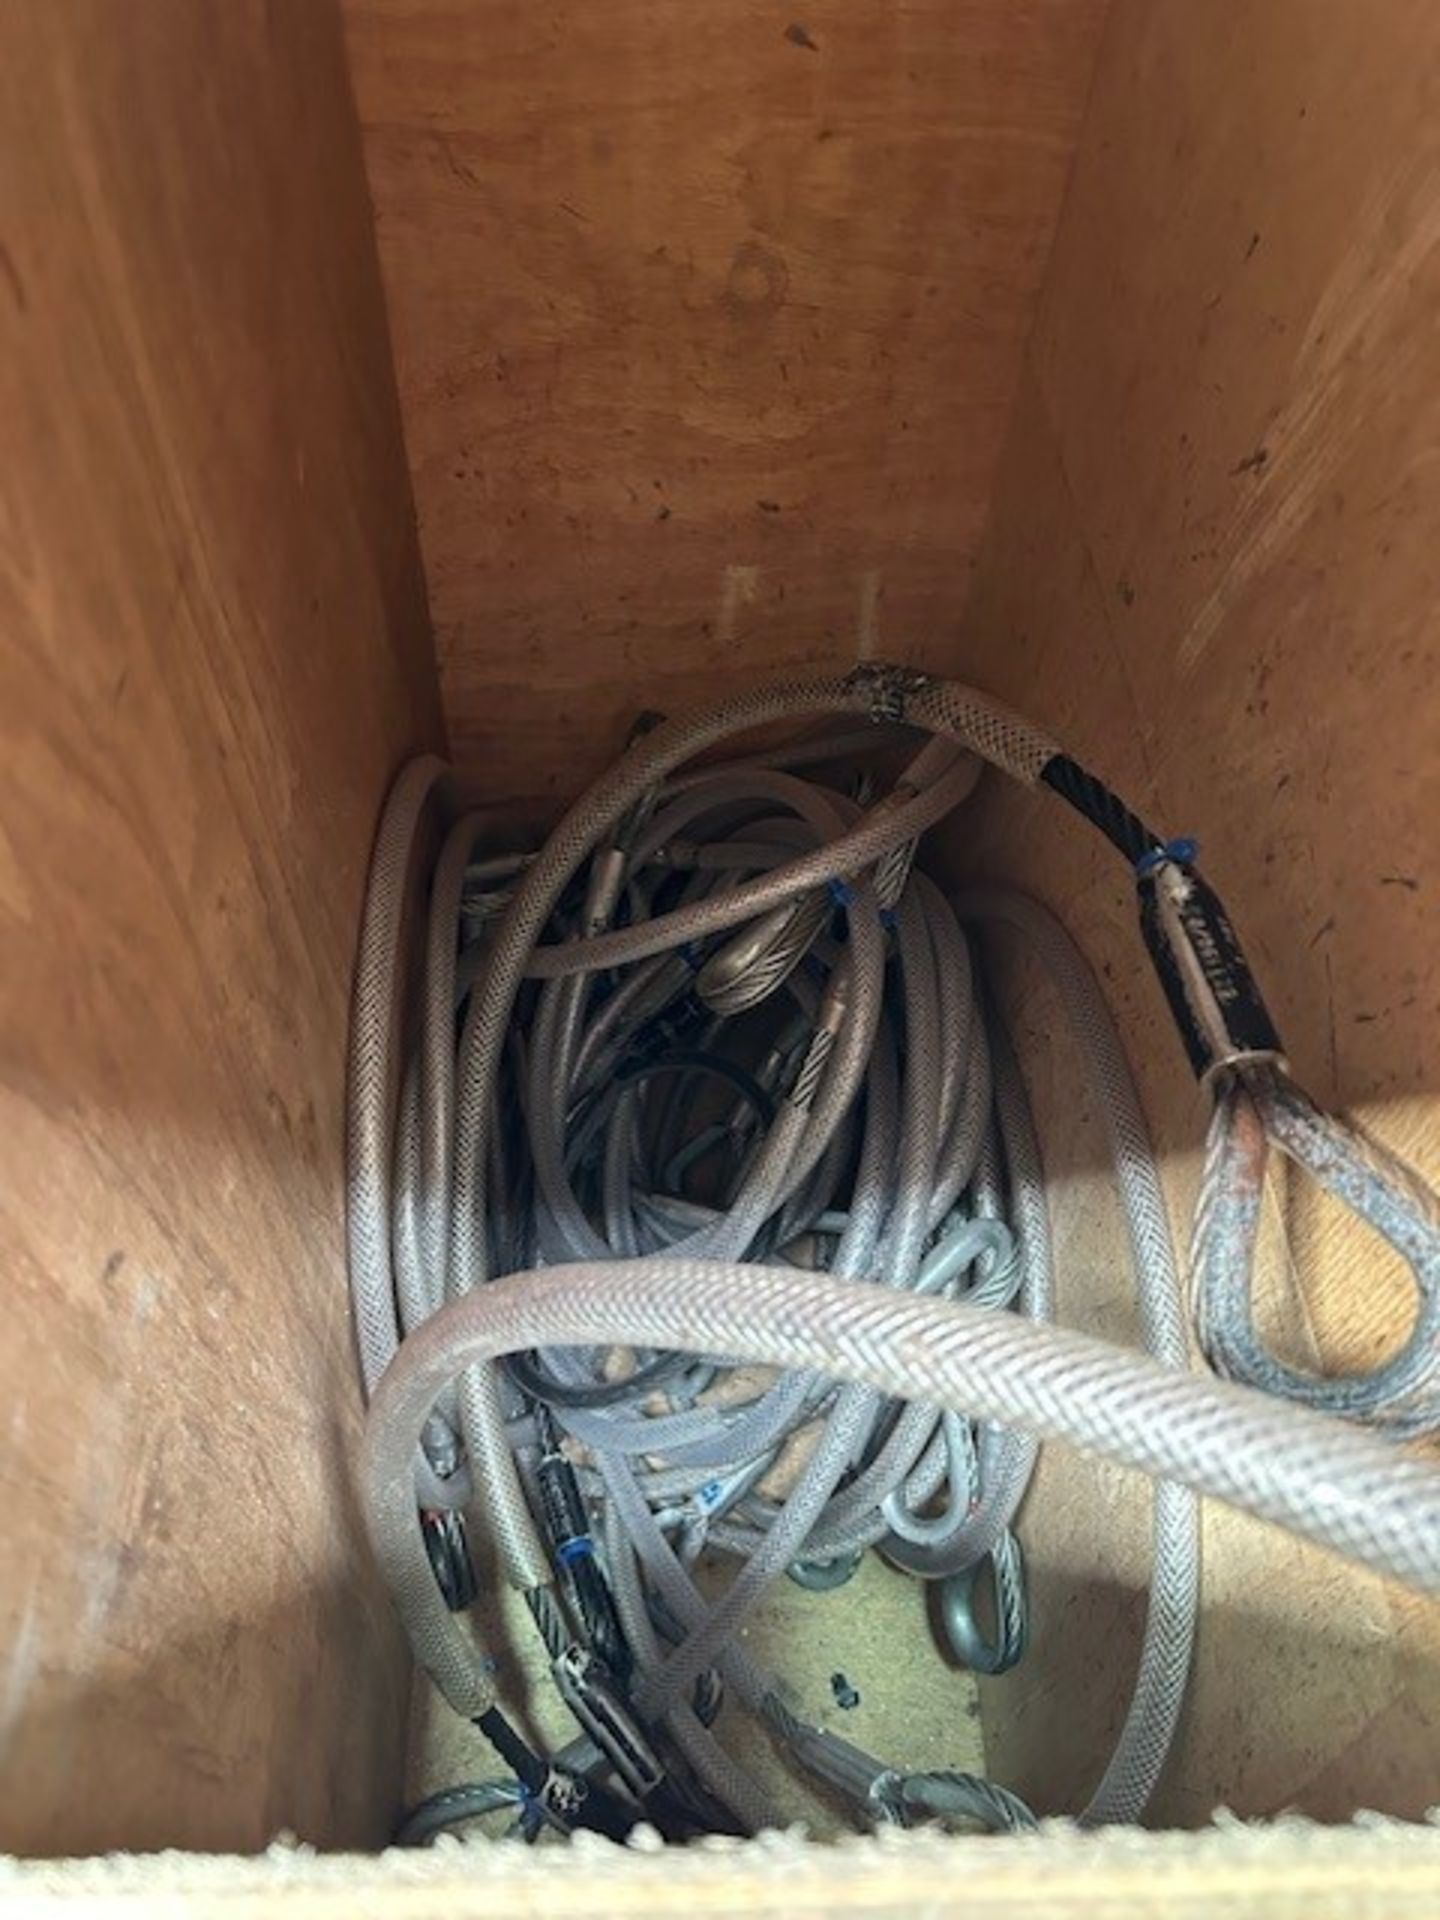 Contents Of Rigging Rack - Image 14 of 17